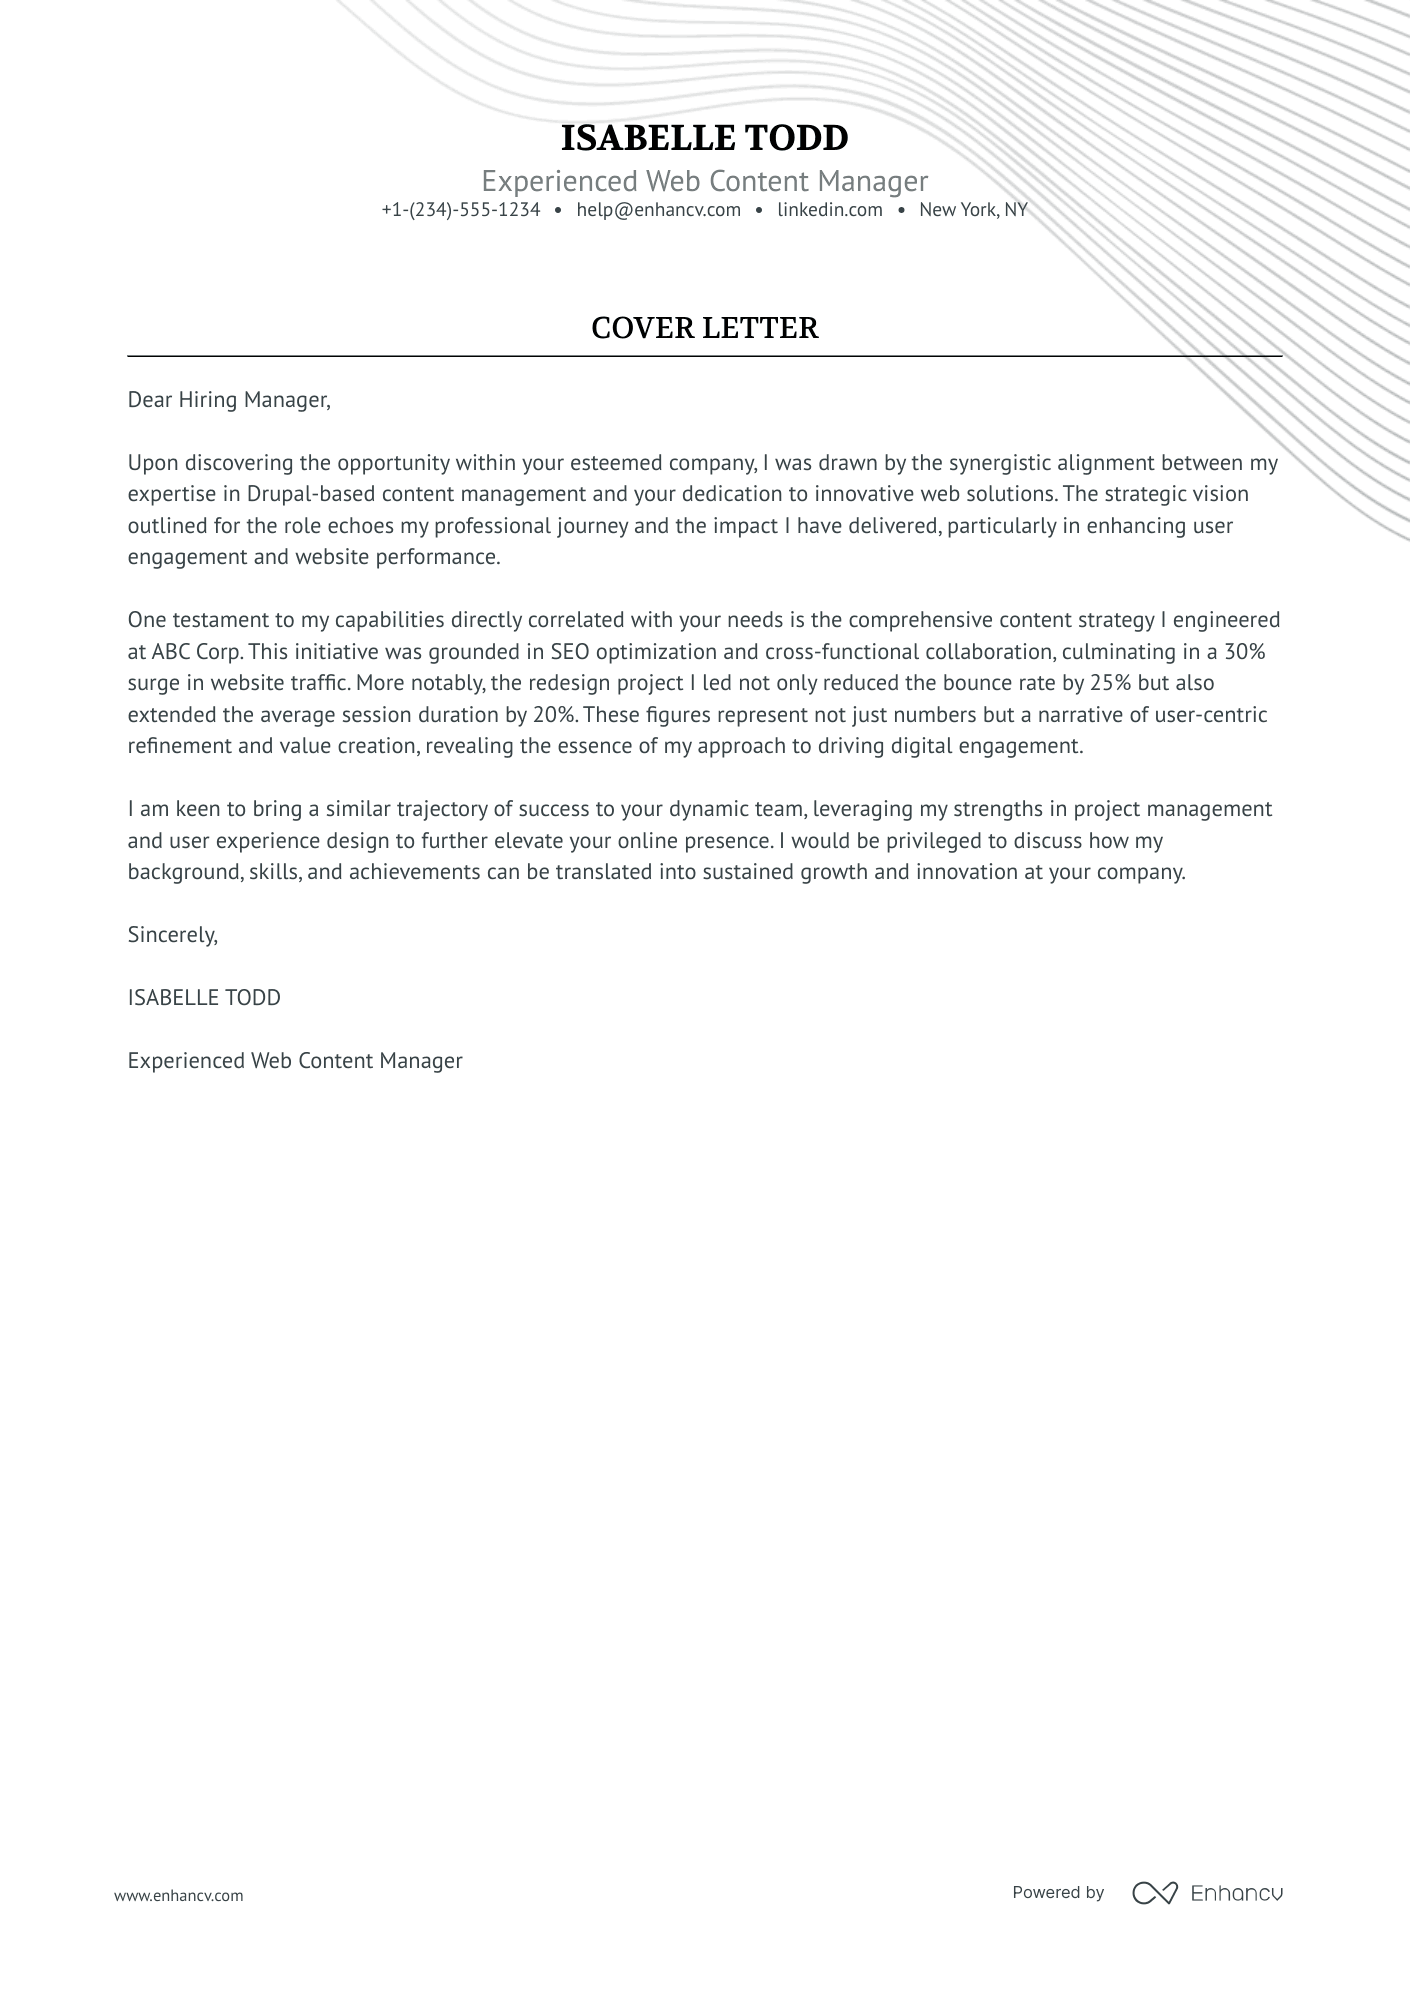 Web Content Manager cover letter